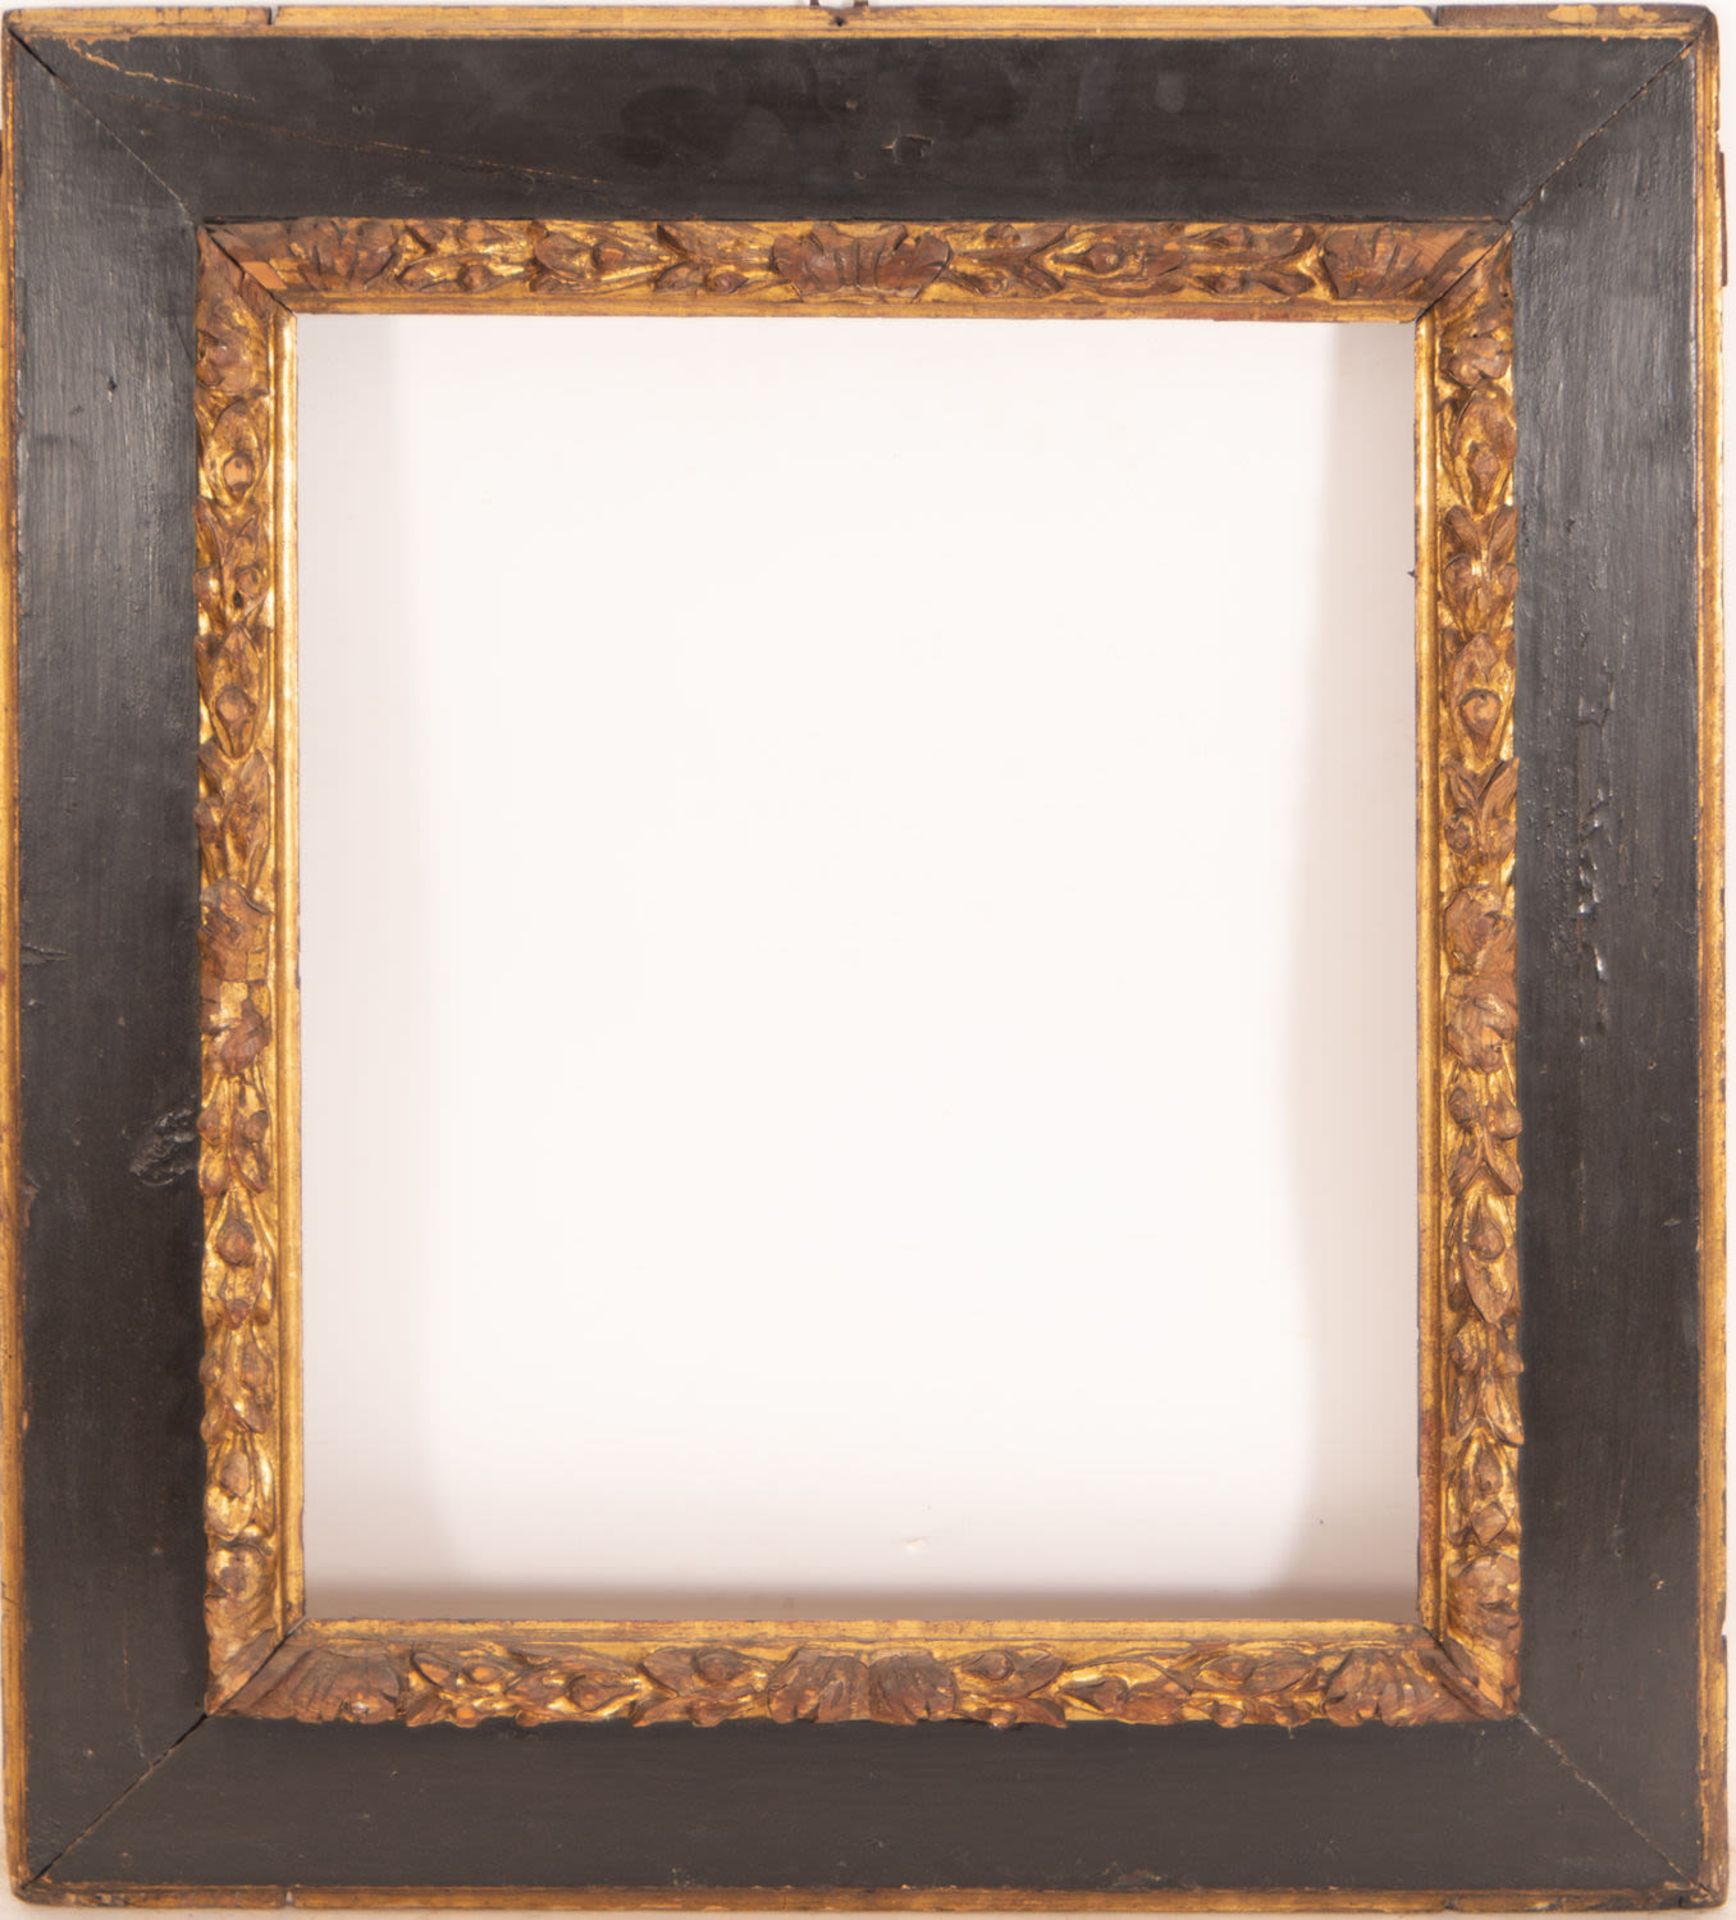 17th Century Baroque Distinguished Black and Giltwood Spanish Frame, 17th century